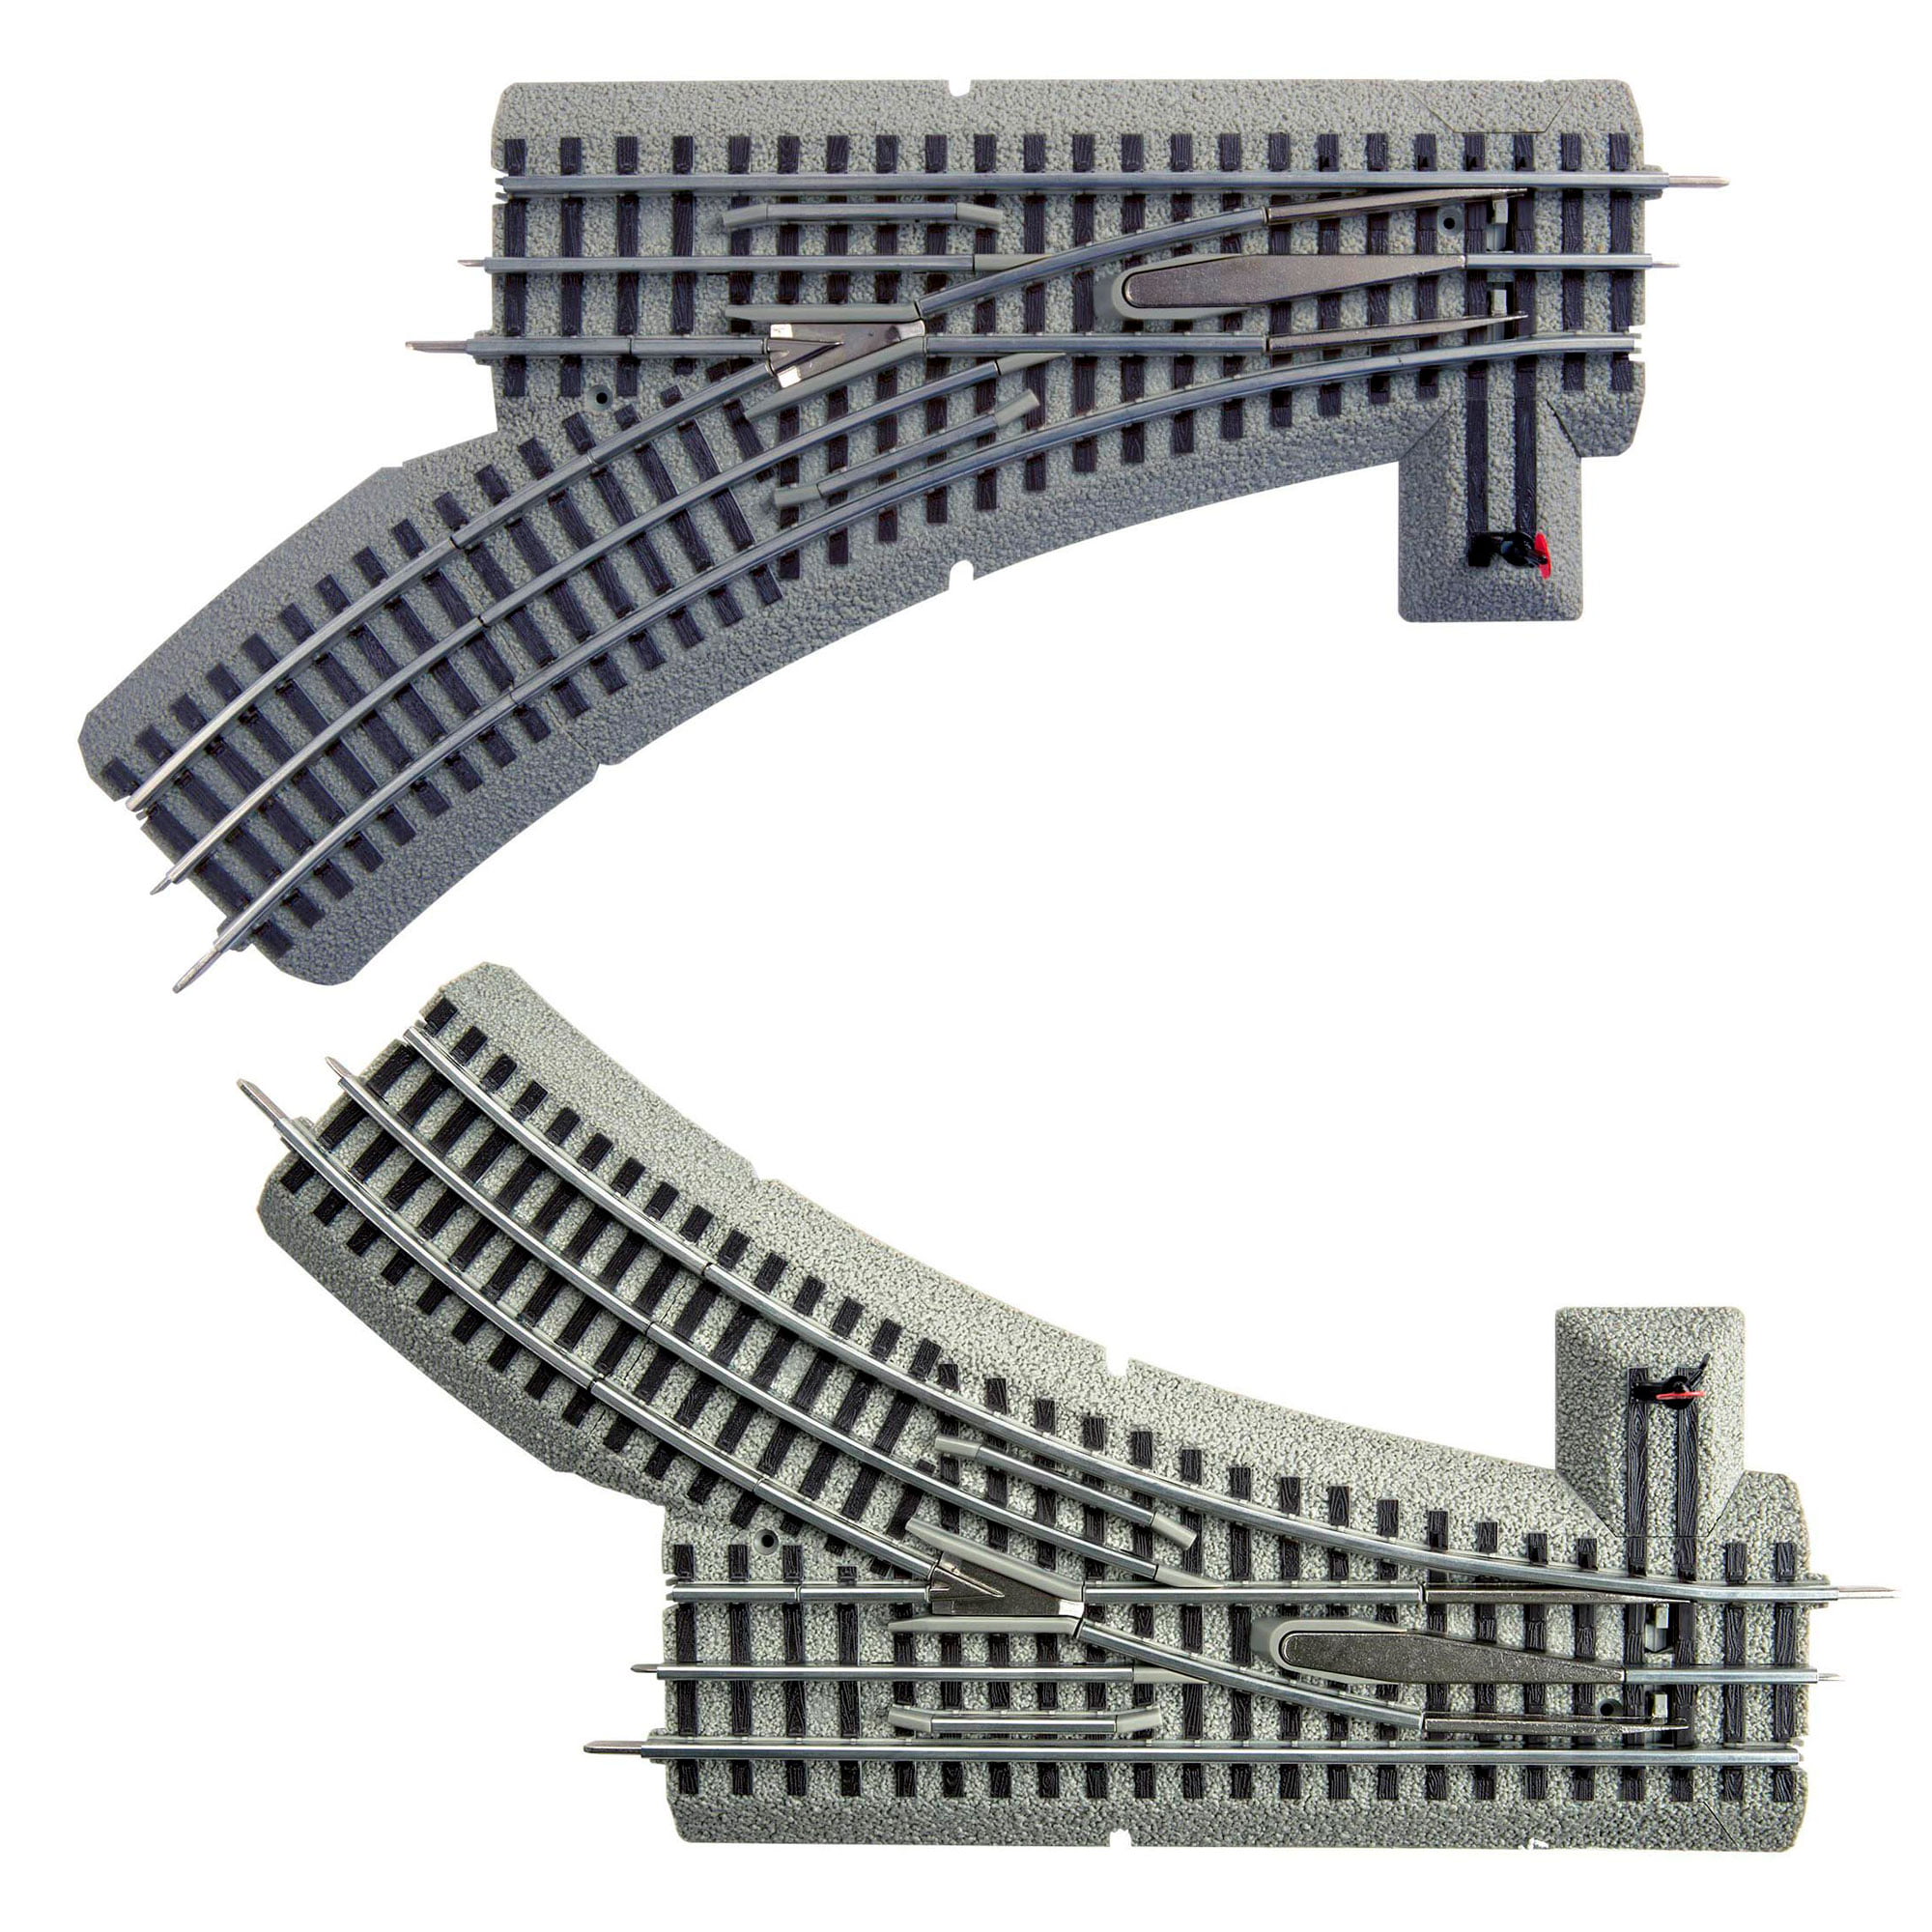 LIONEL STRAIGHT 6 INCH BY 2 INCH READY TO PLAY PLASTIC TRACK BY THE PIECE SALE 